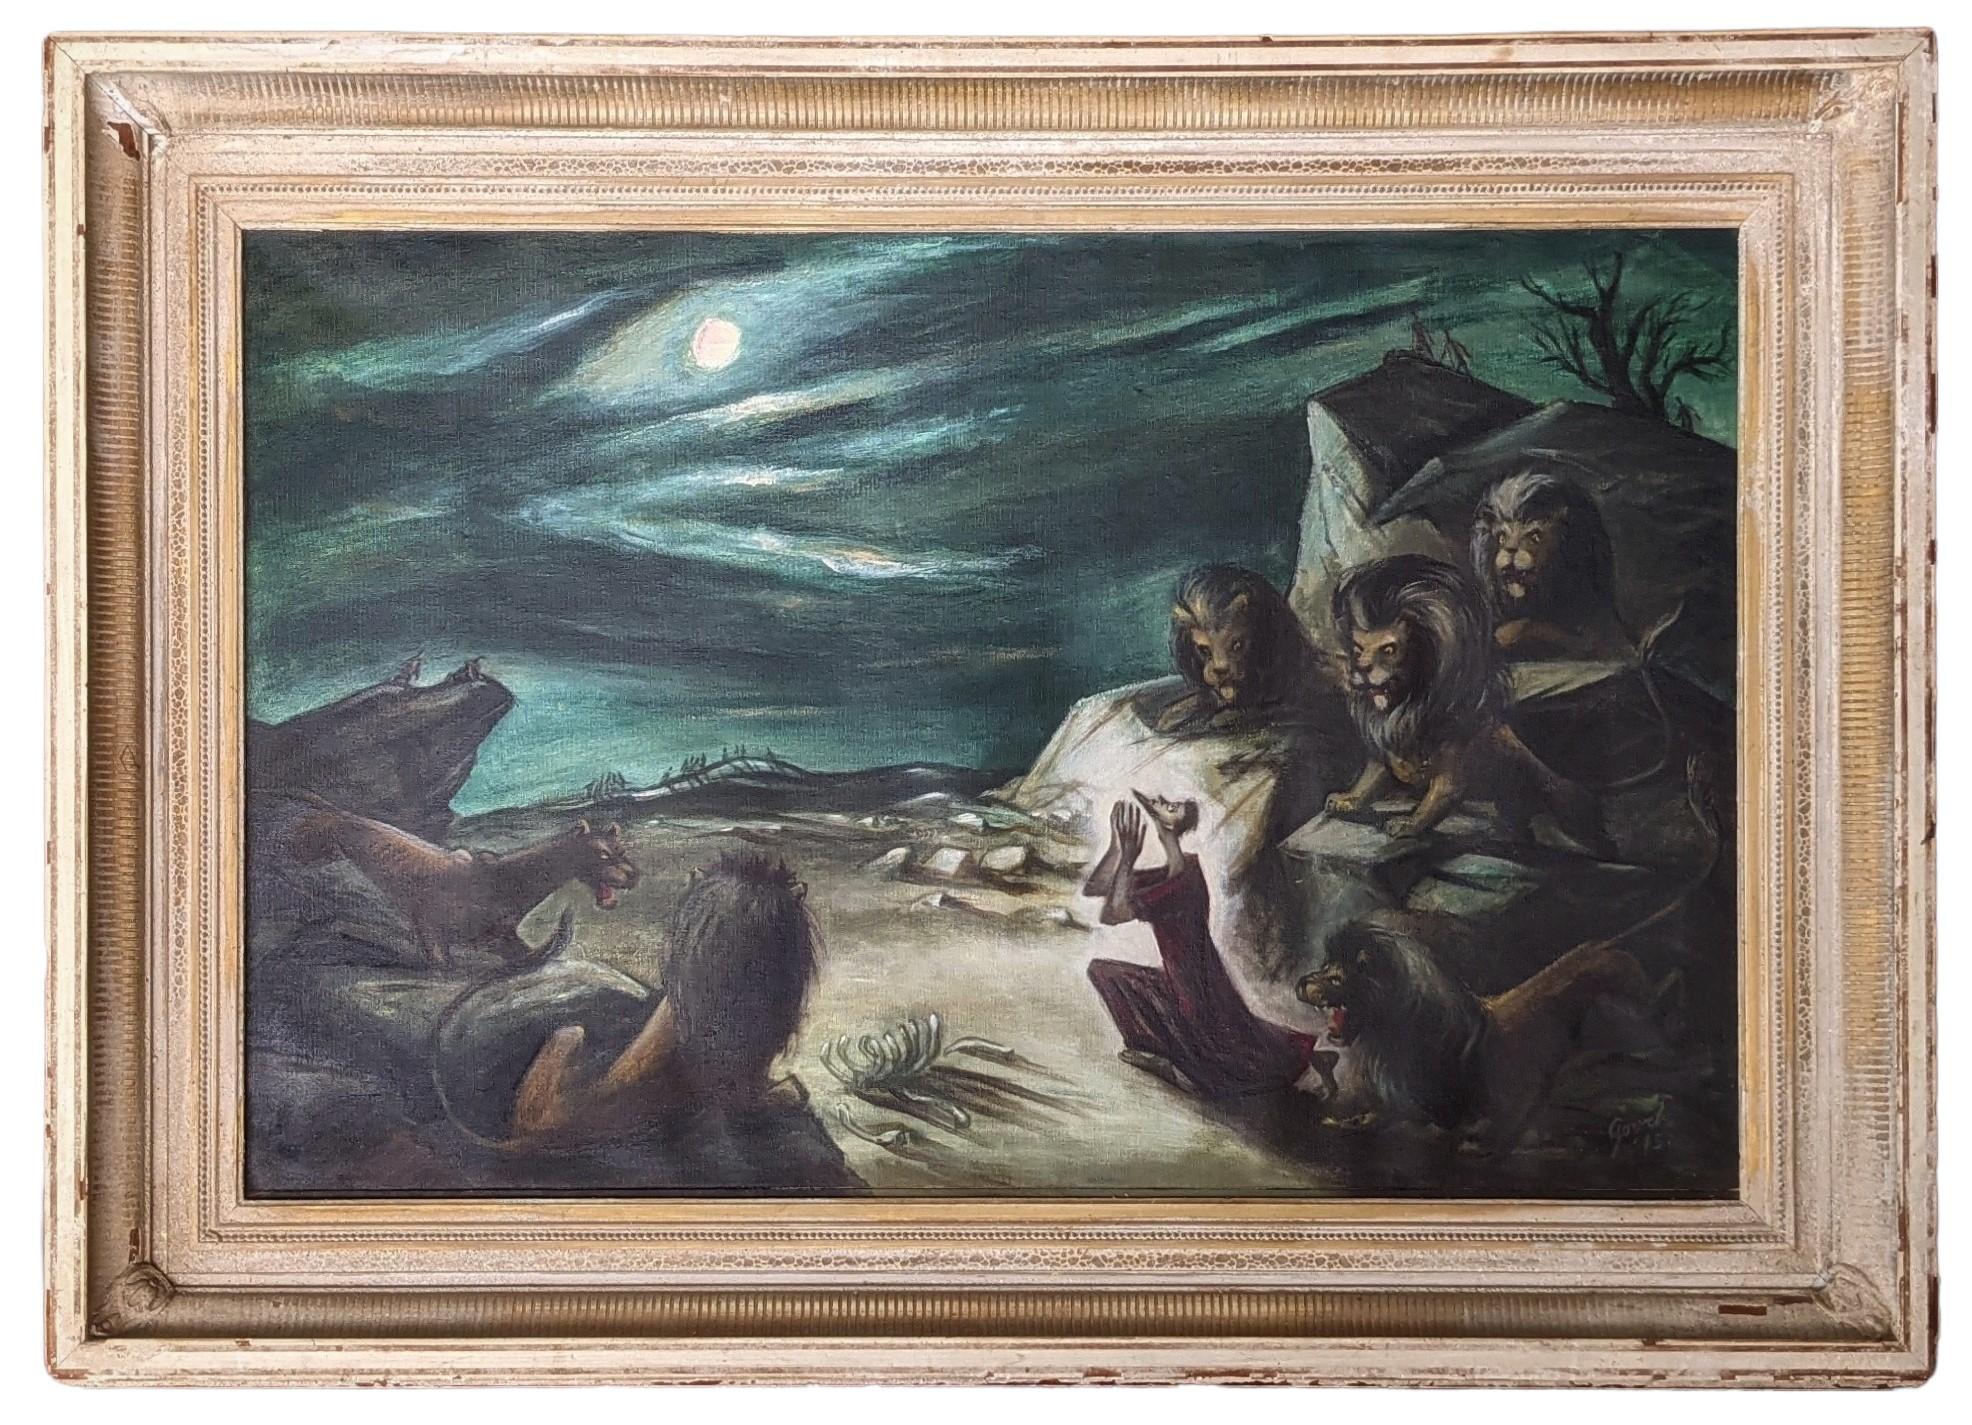 Donald Burnette Gooch (American, 1907 - 1985)'

Signed: Gooch '45 (Lower, Right)

" Daniel ", 1945 (titled on verso)

Oil on Canvas 

23 1/4" x 36"

Housed in it's original 4" artist painted frame

Noted on verso: D. B. GOOCH - 1404 BROADWAY - ANN